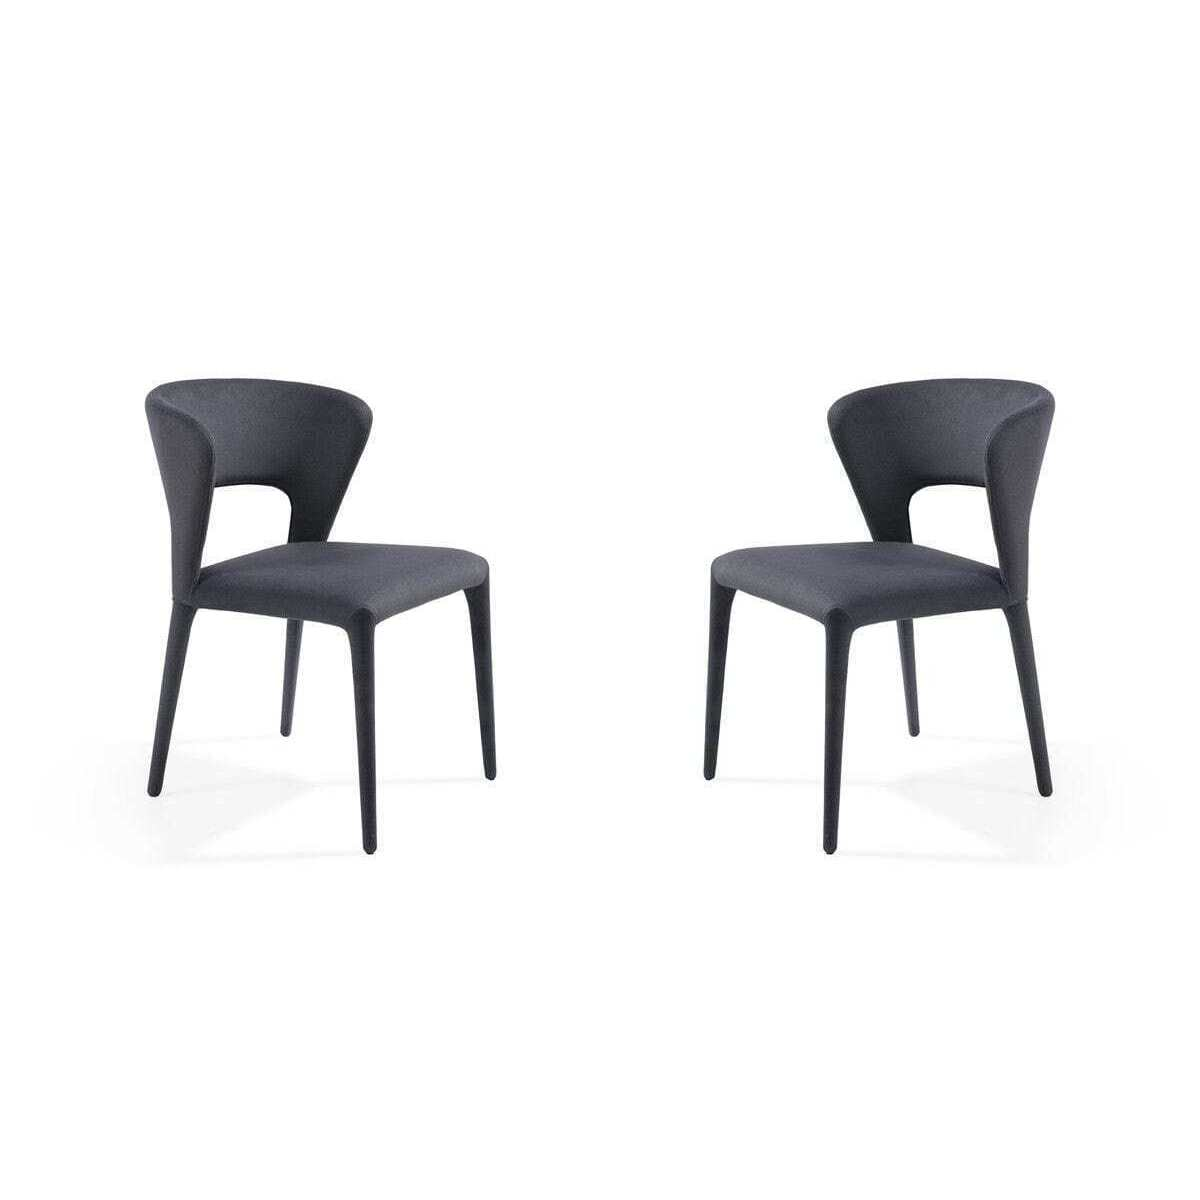 Pari I Dining Chair Set of 2 Luxe Cinder Grey